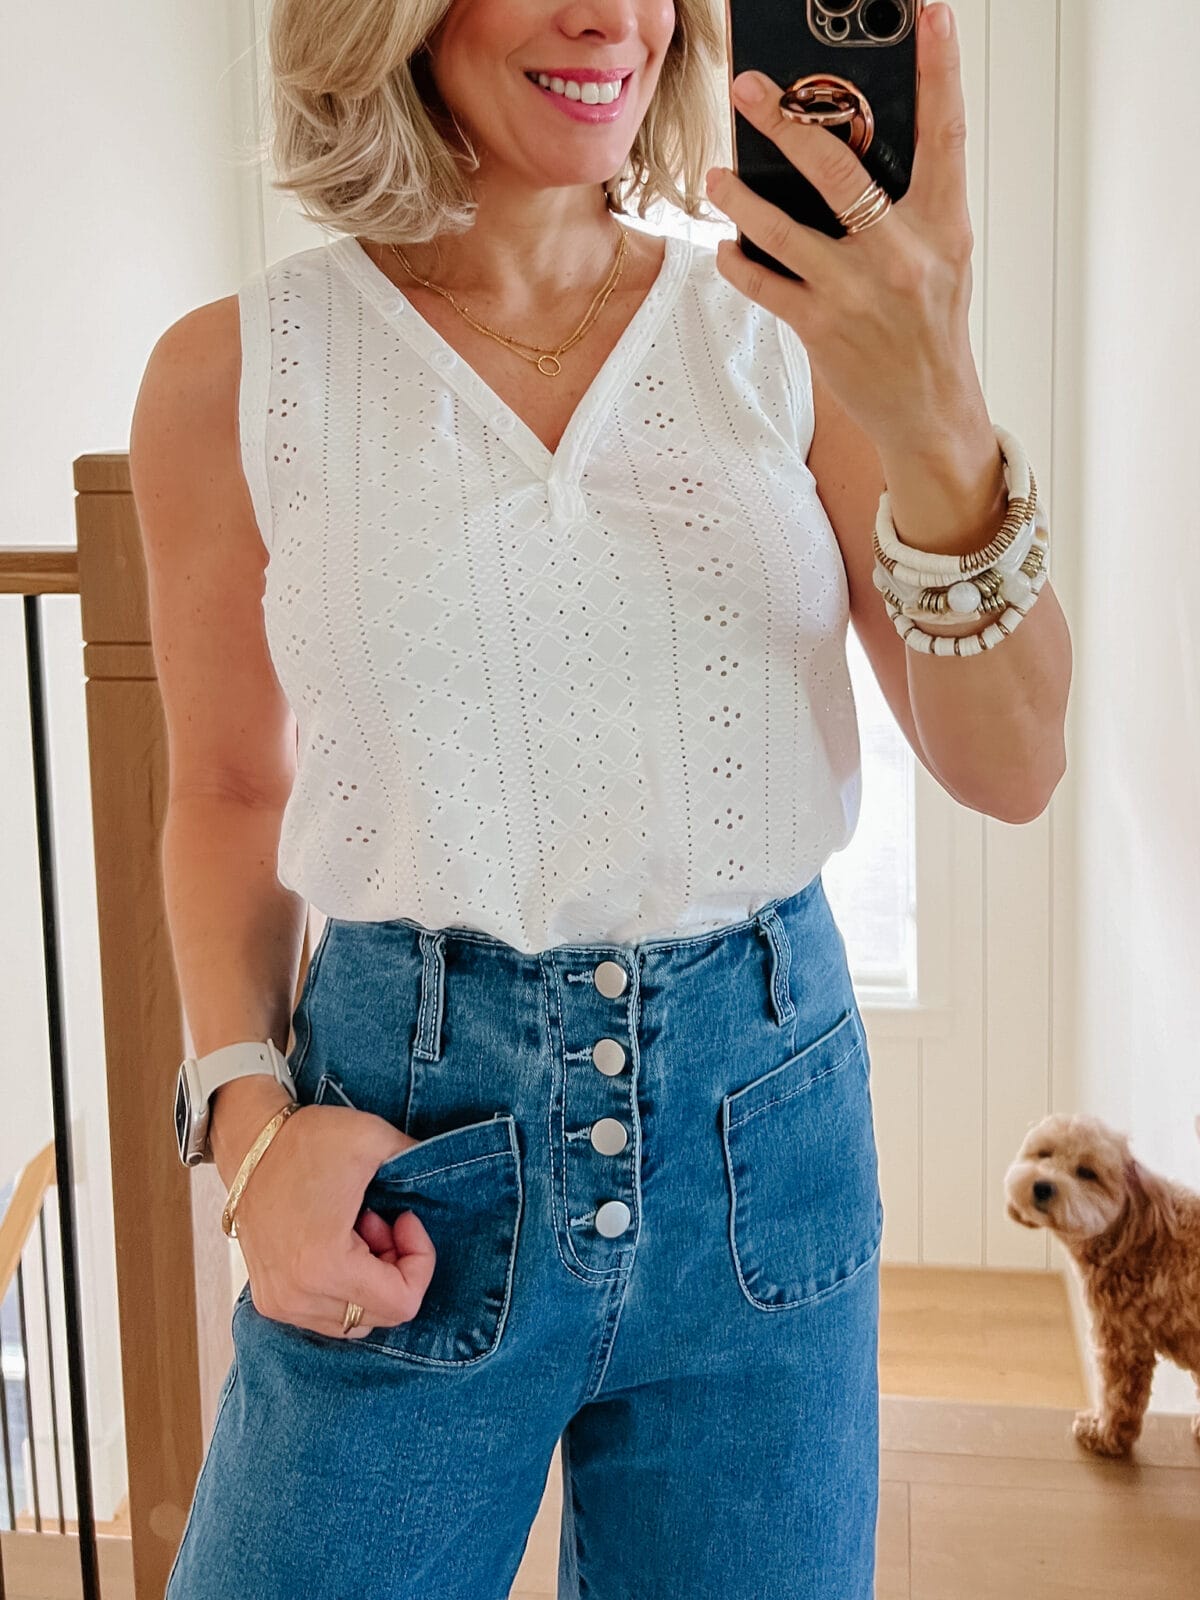 Eyelet Tank, Button Front Jeans, Sandals 